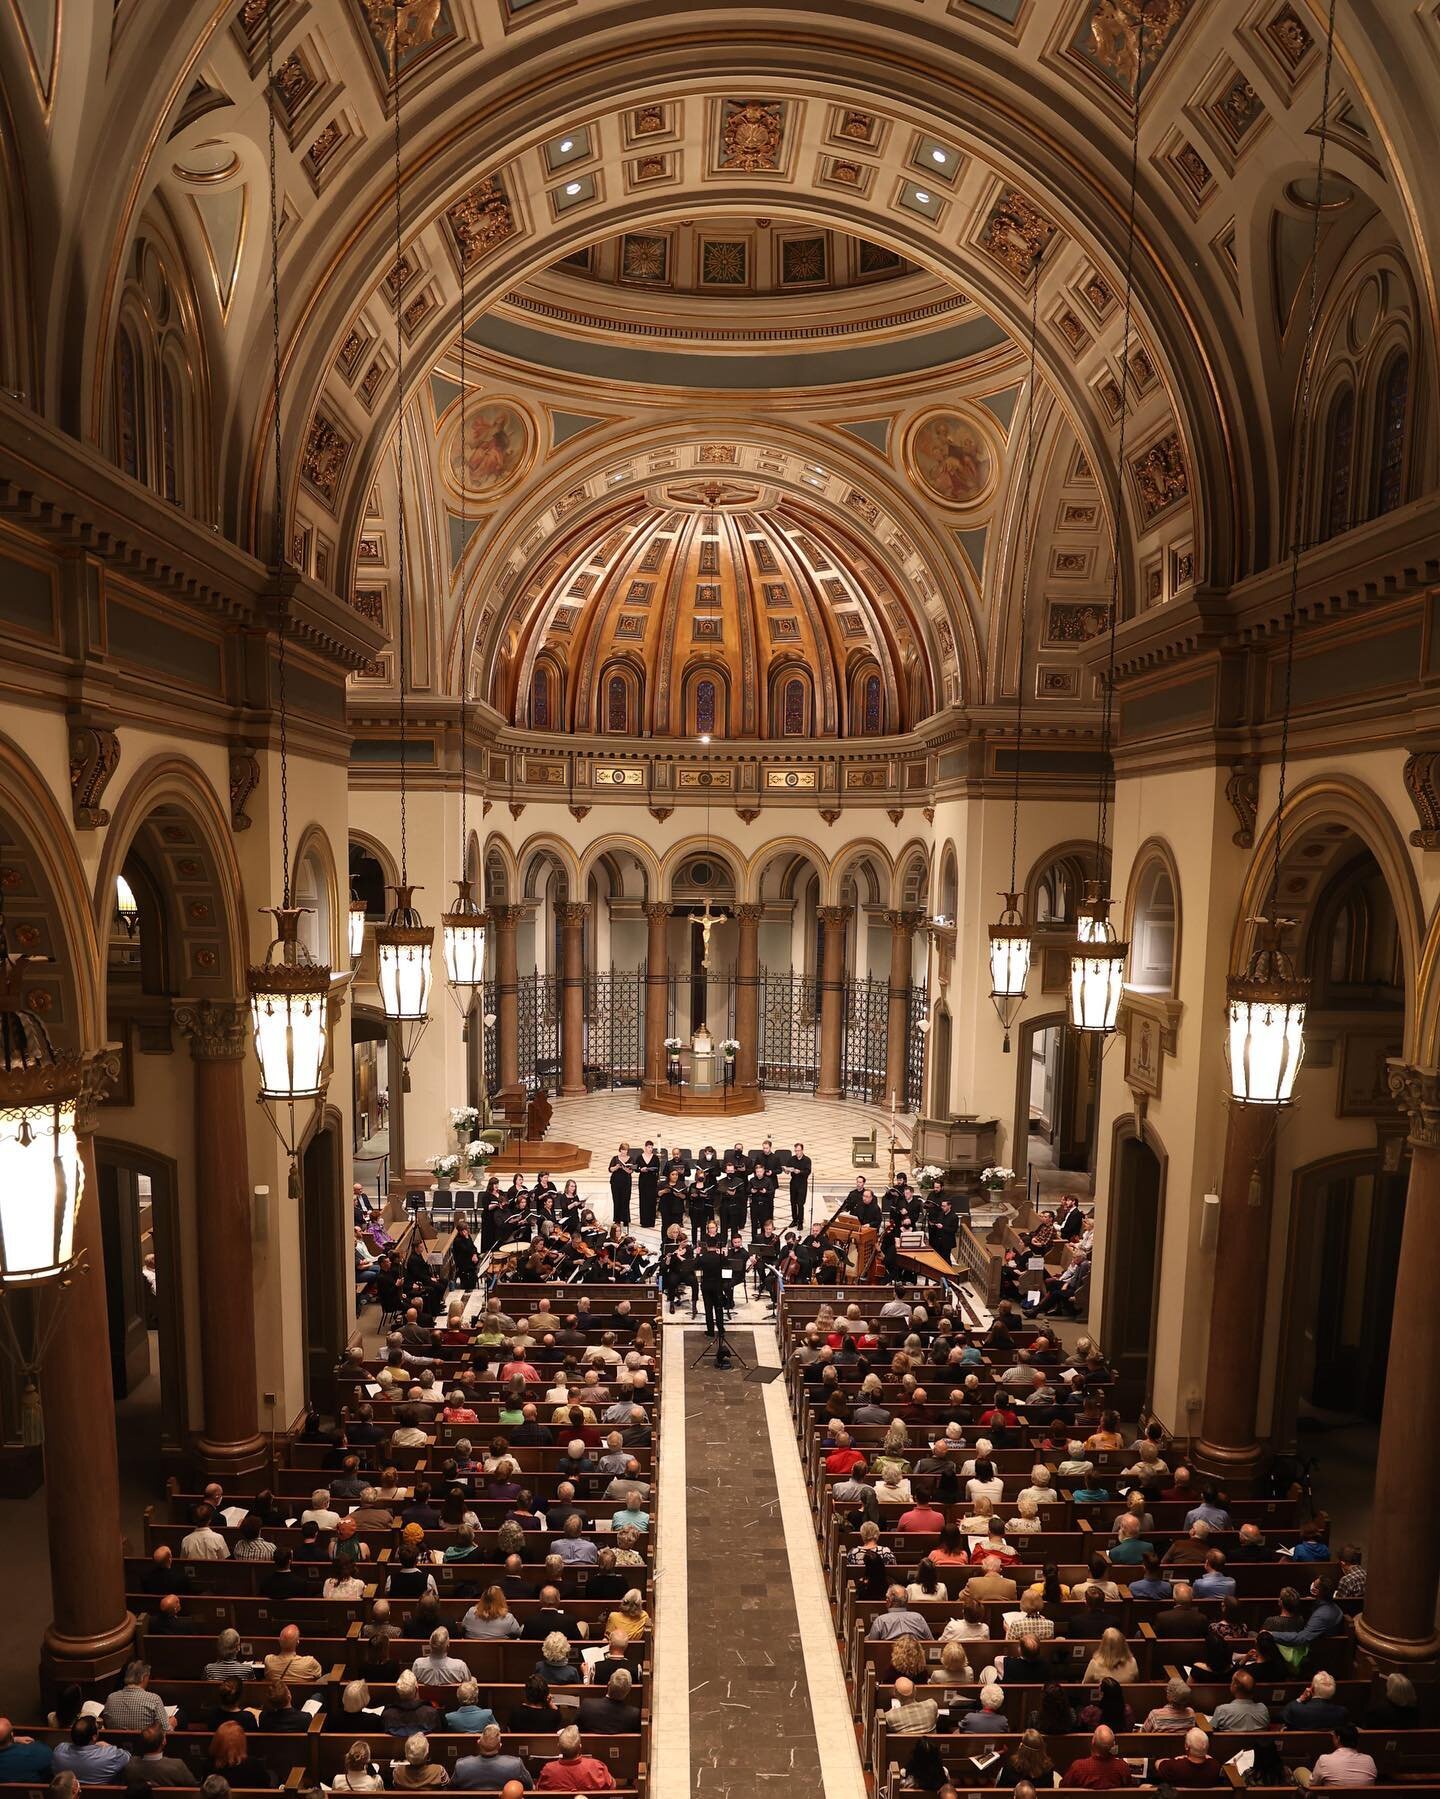 An amazing evening concert last night at the Richmond Cathedral. Bach in B minor Mass. 

#rvaphotographer #concertphotography #cathedralofthesacredheart